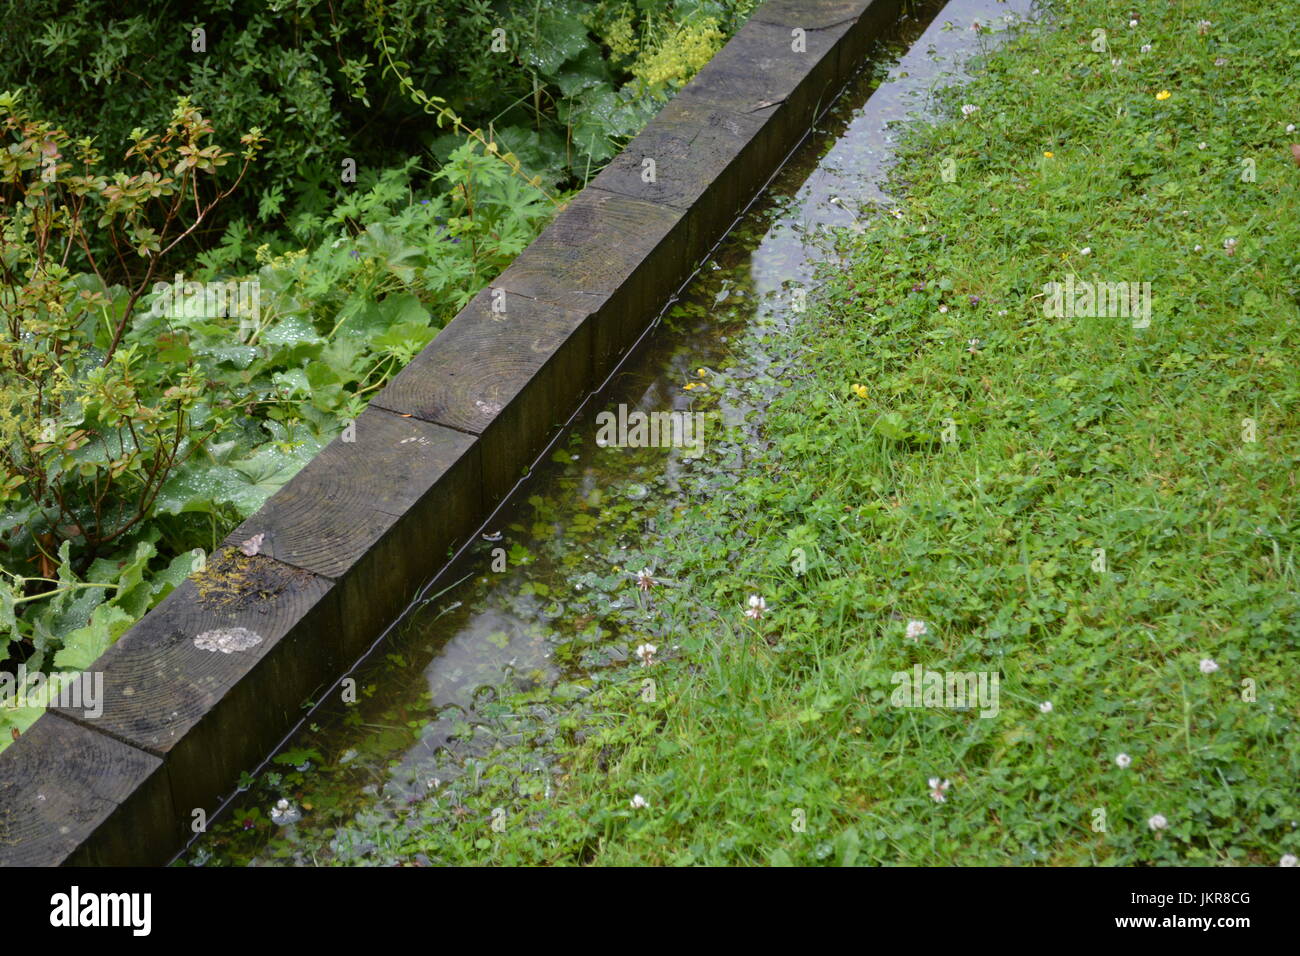 Water rain collecting on lawn grass against planted border made of large sleepers cut sectional timber wood re rainfall watering waterlogged borders Stock Photo